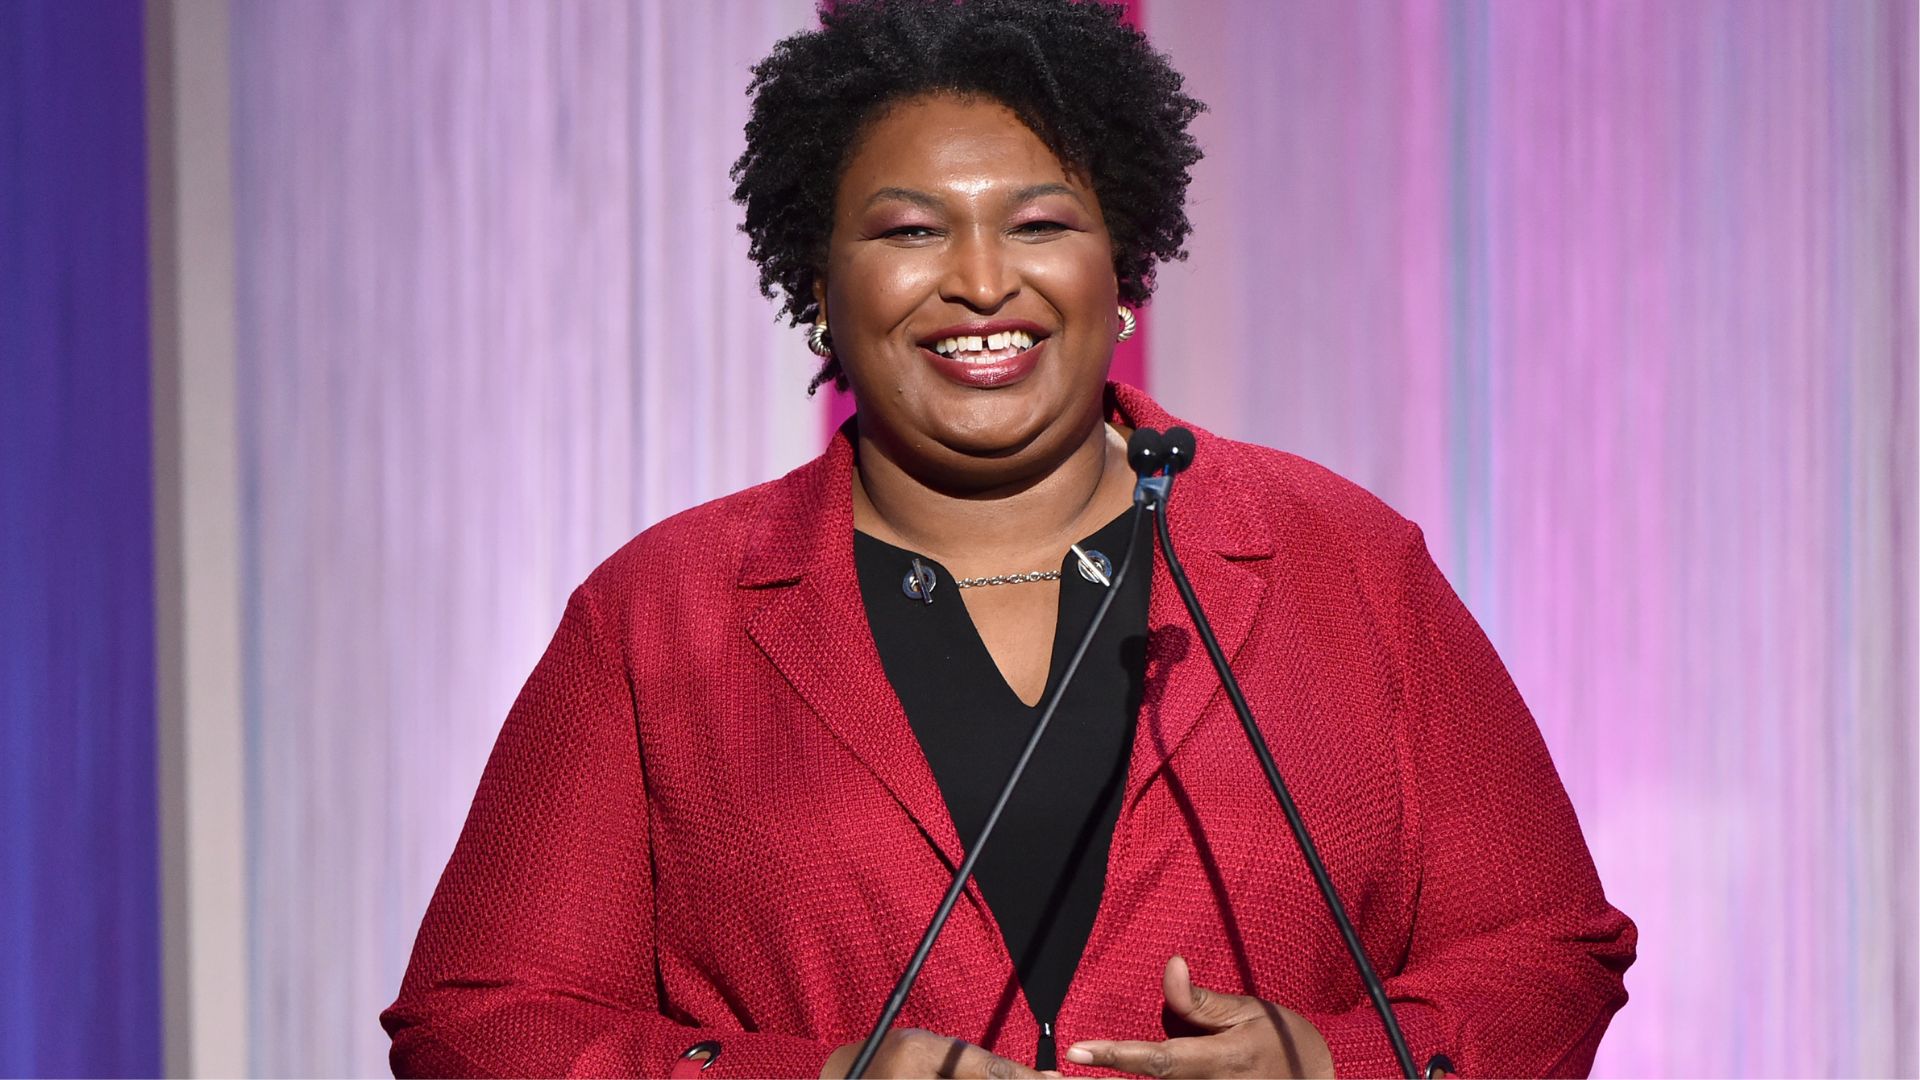 Stacey Abrams Now Throwing Her Weight Around With Group Advocating Gas Stove Regulations